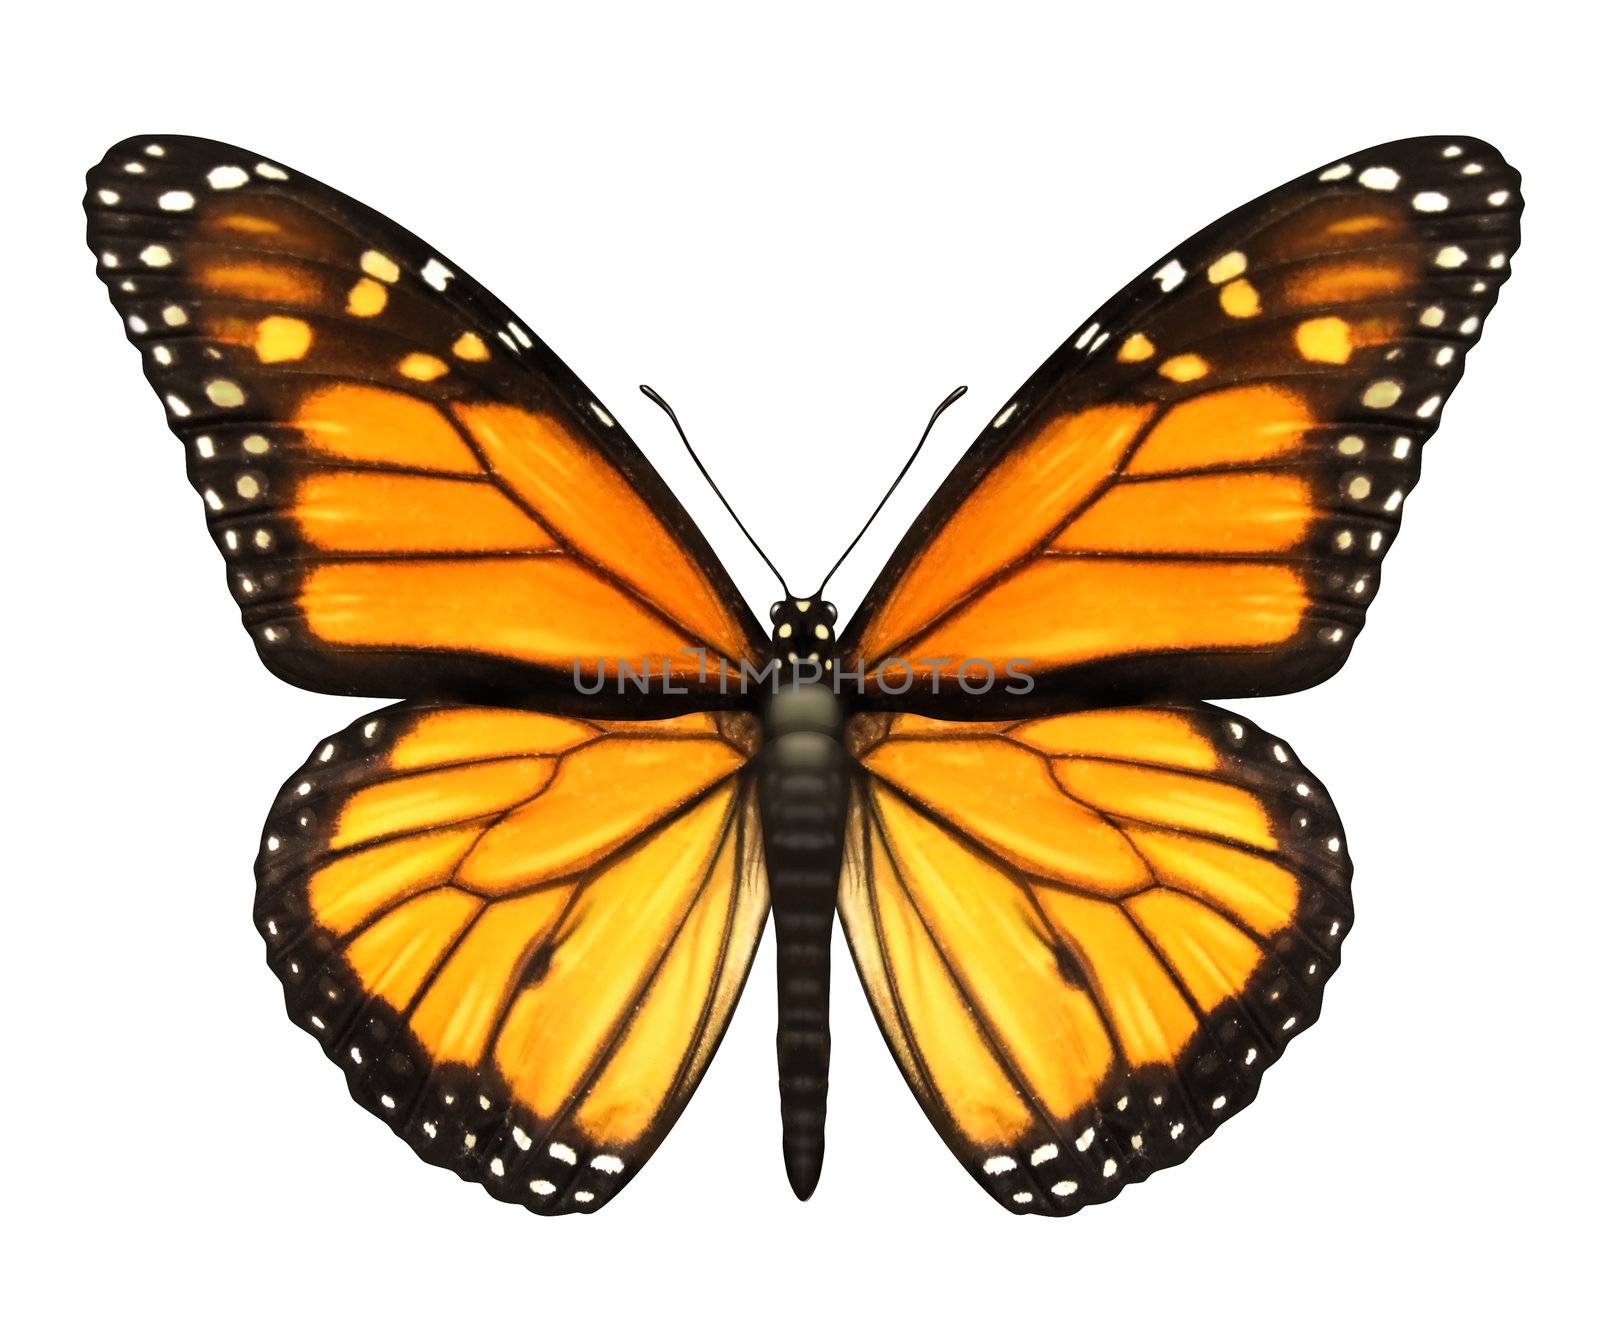 Monarch Butterfly by brightsource